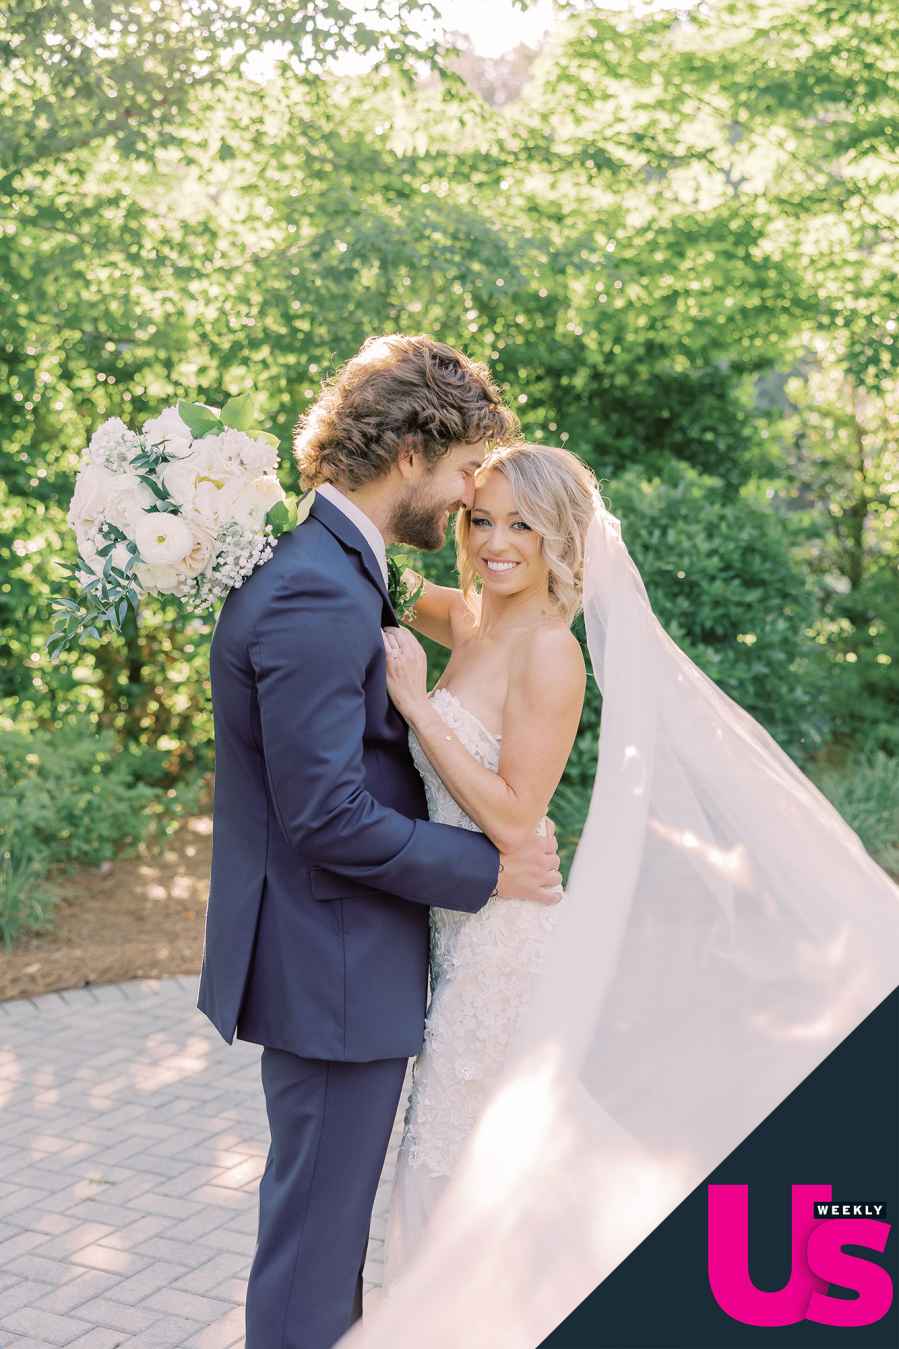 Best Day MLB Kelsey Wingert Marries Casey Linch After Foul Ball Injury